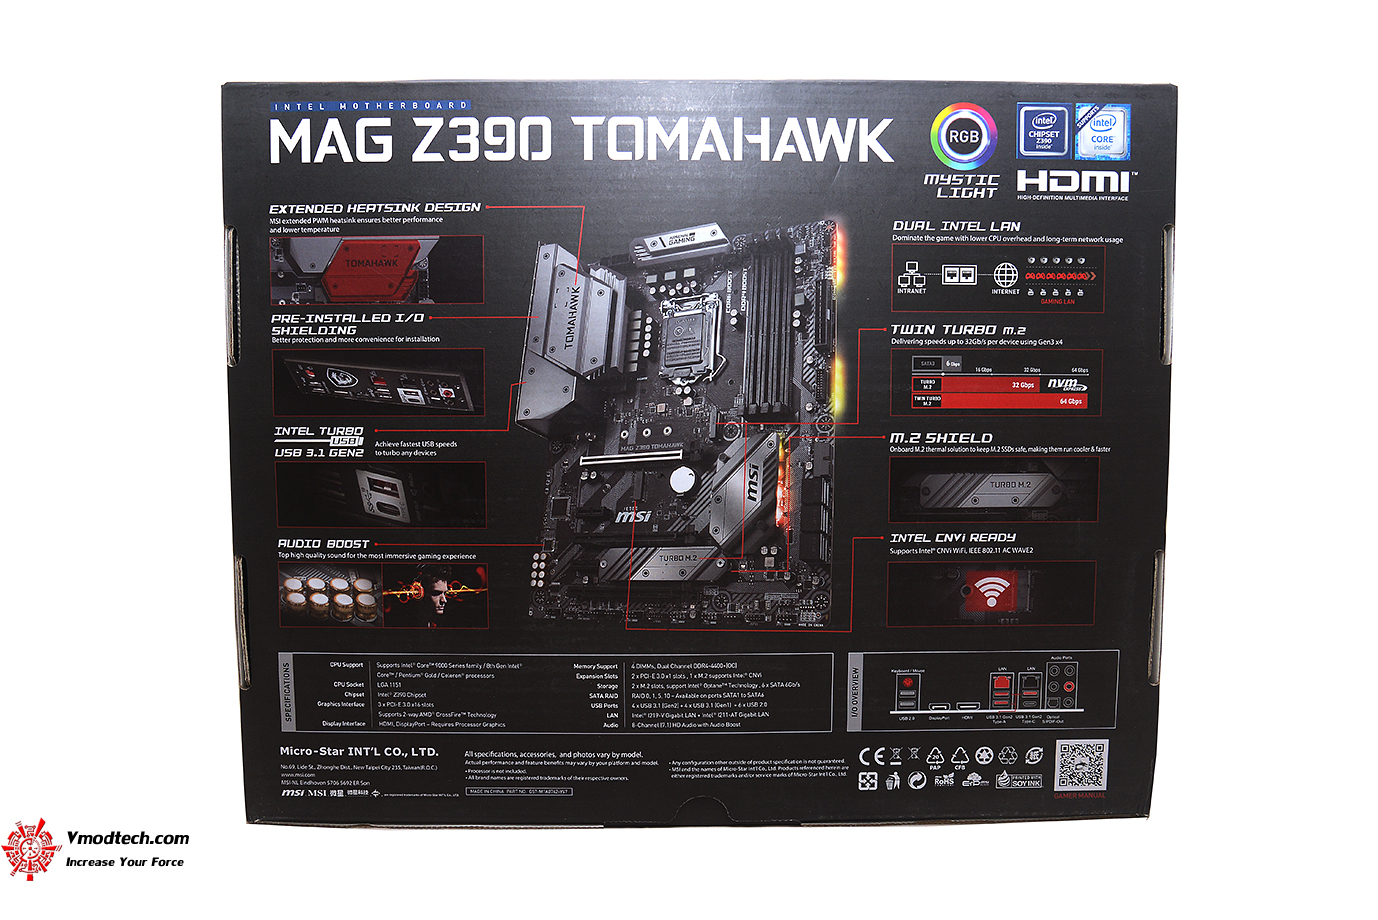 dsc 7441 MSI MAG Z390 TOMAHAWK UNBOX PREVIEW